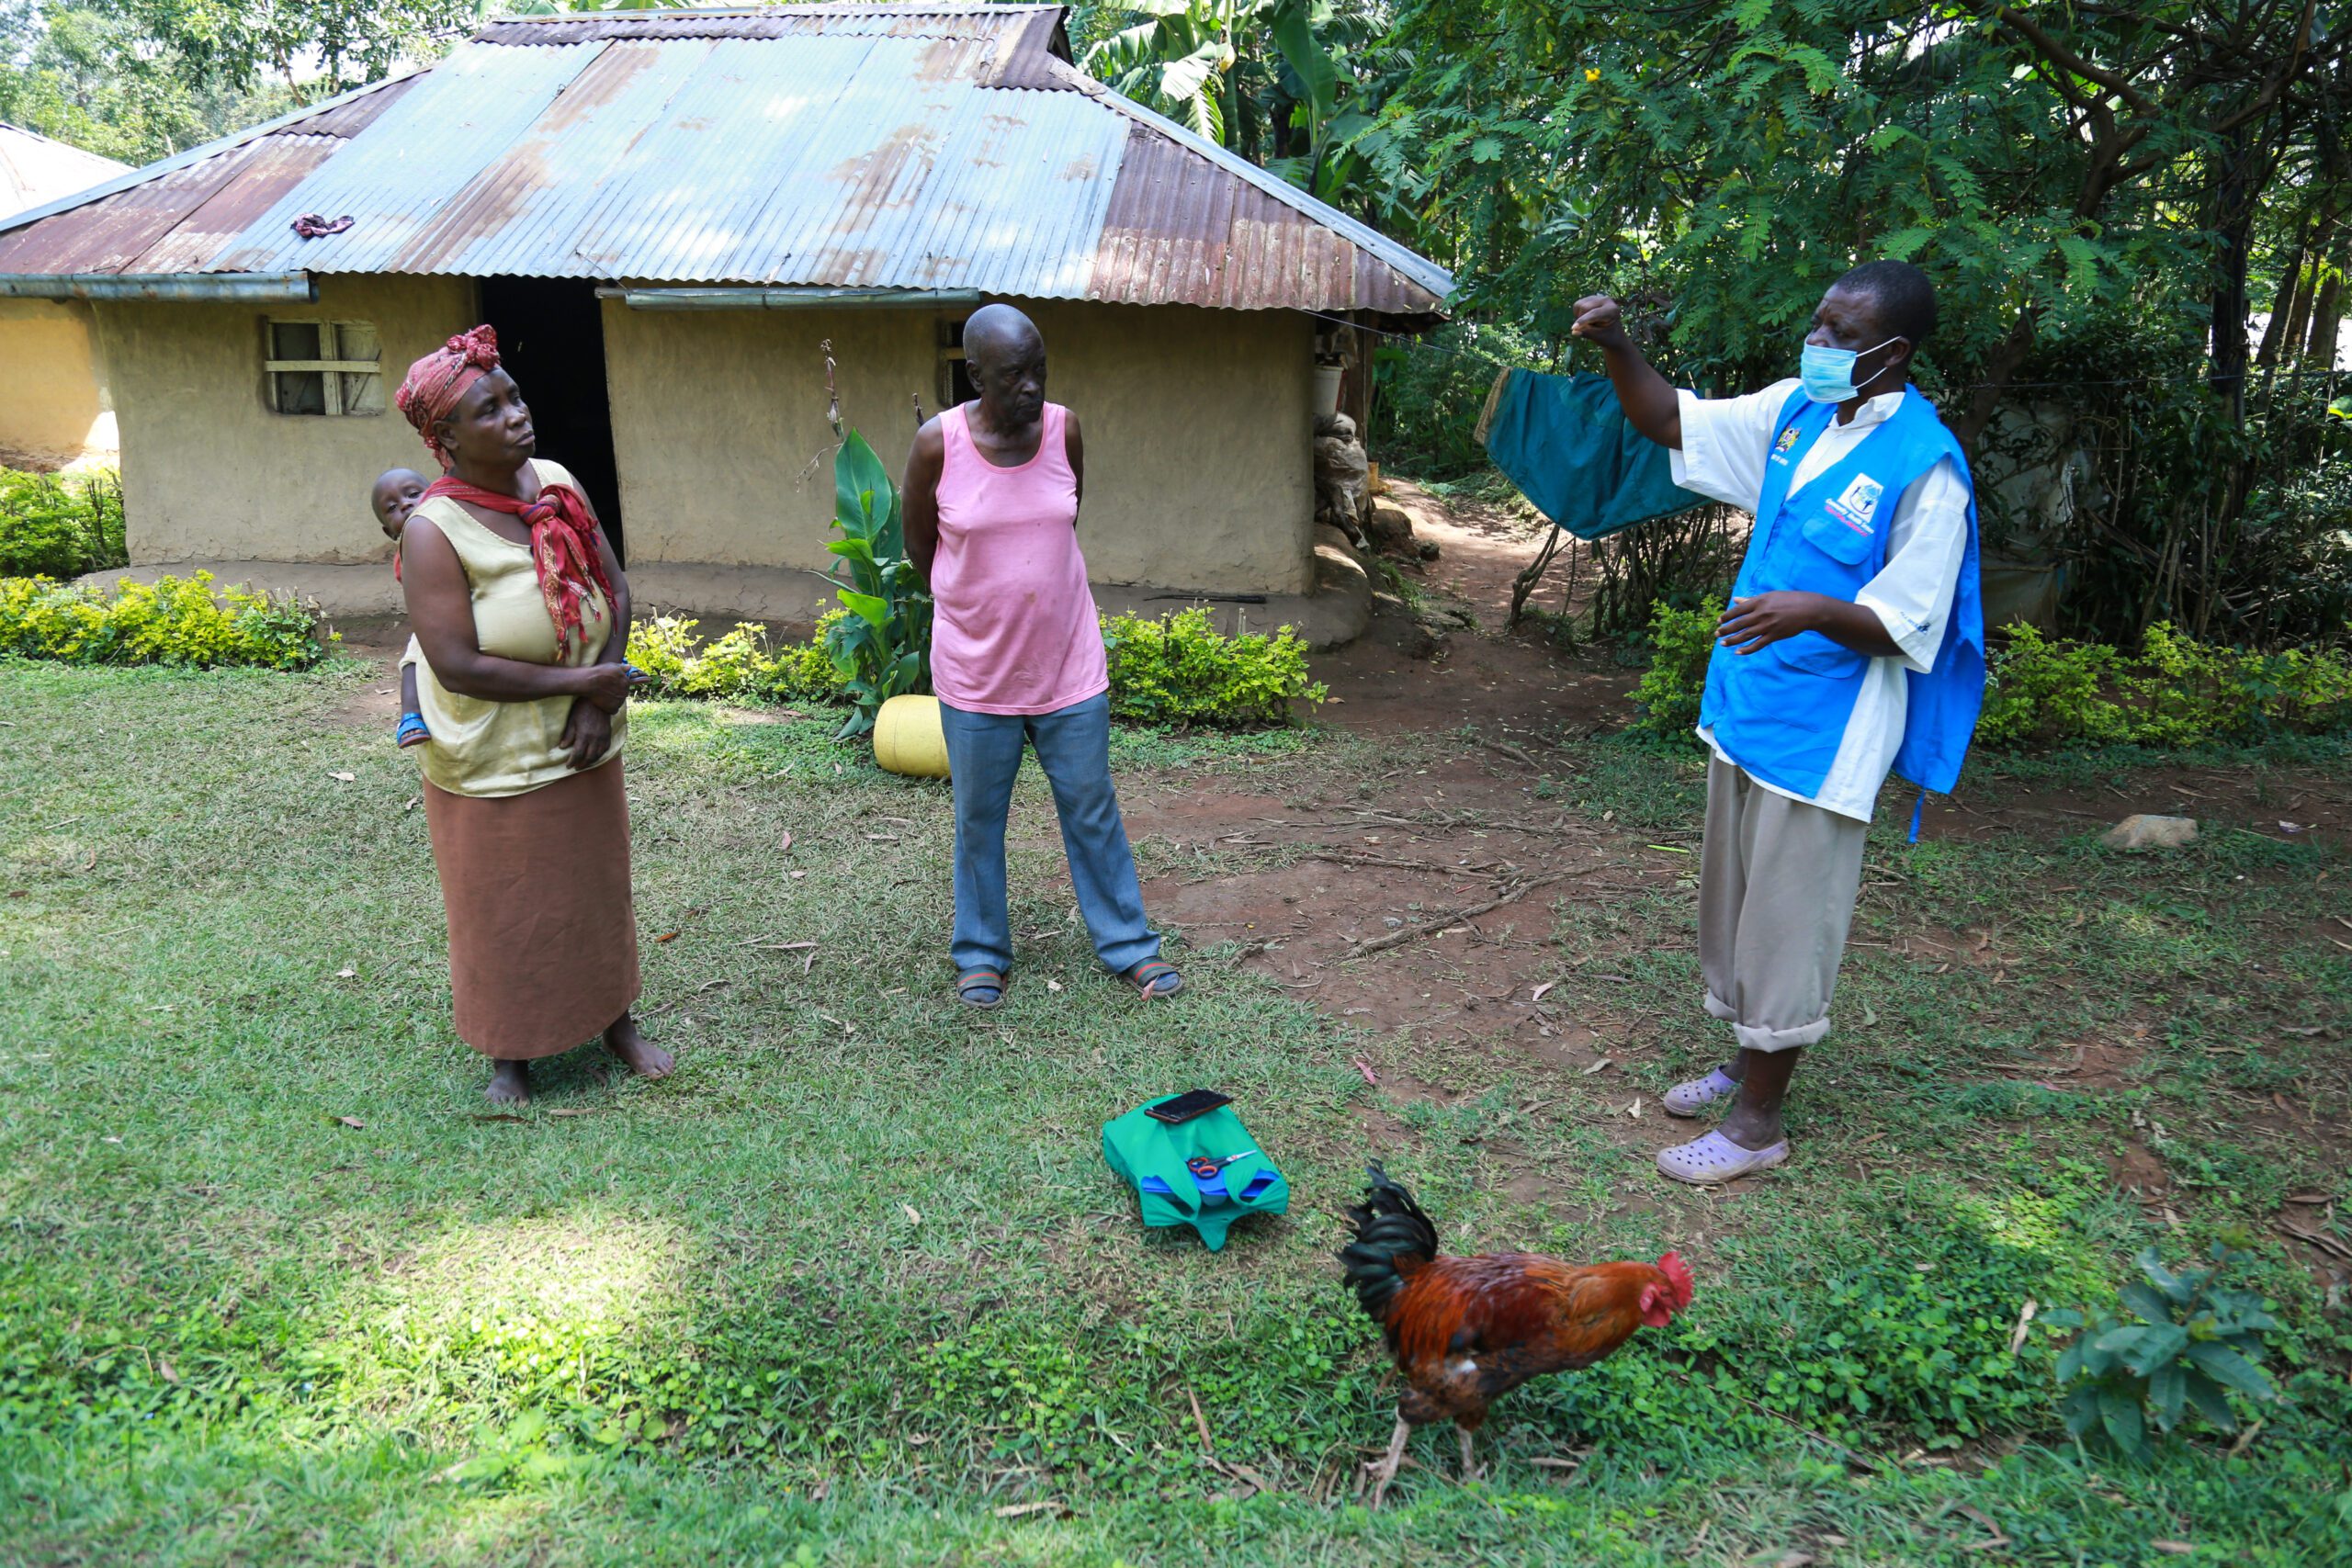 A health volunteer greets a family outside of their home.